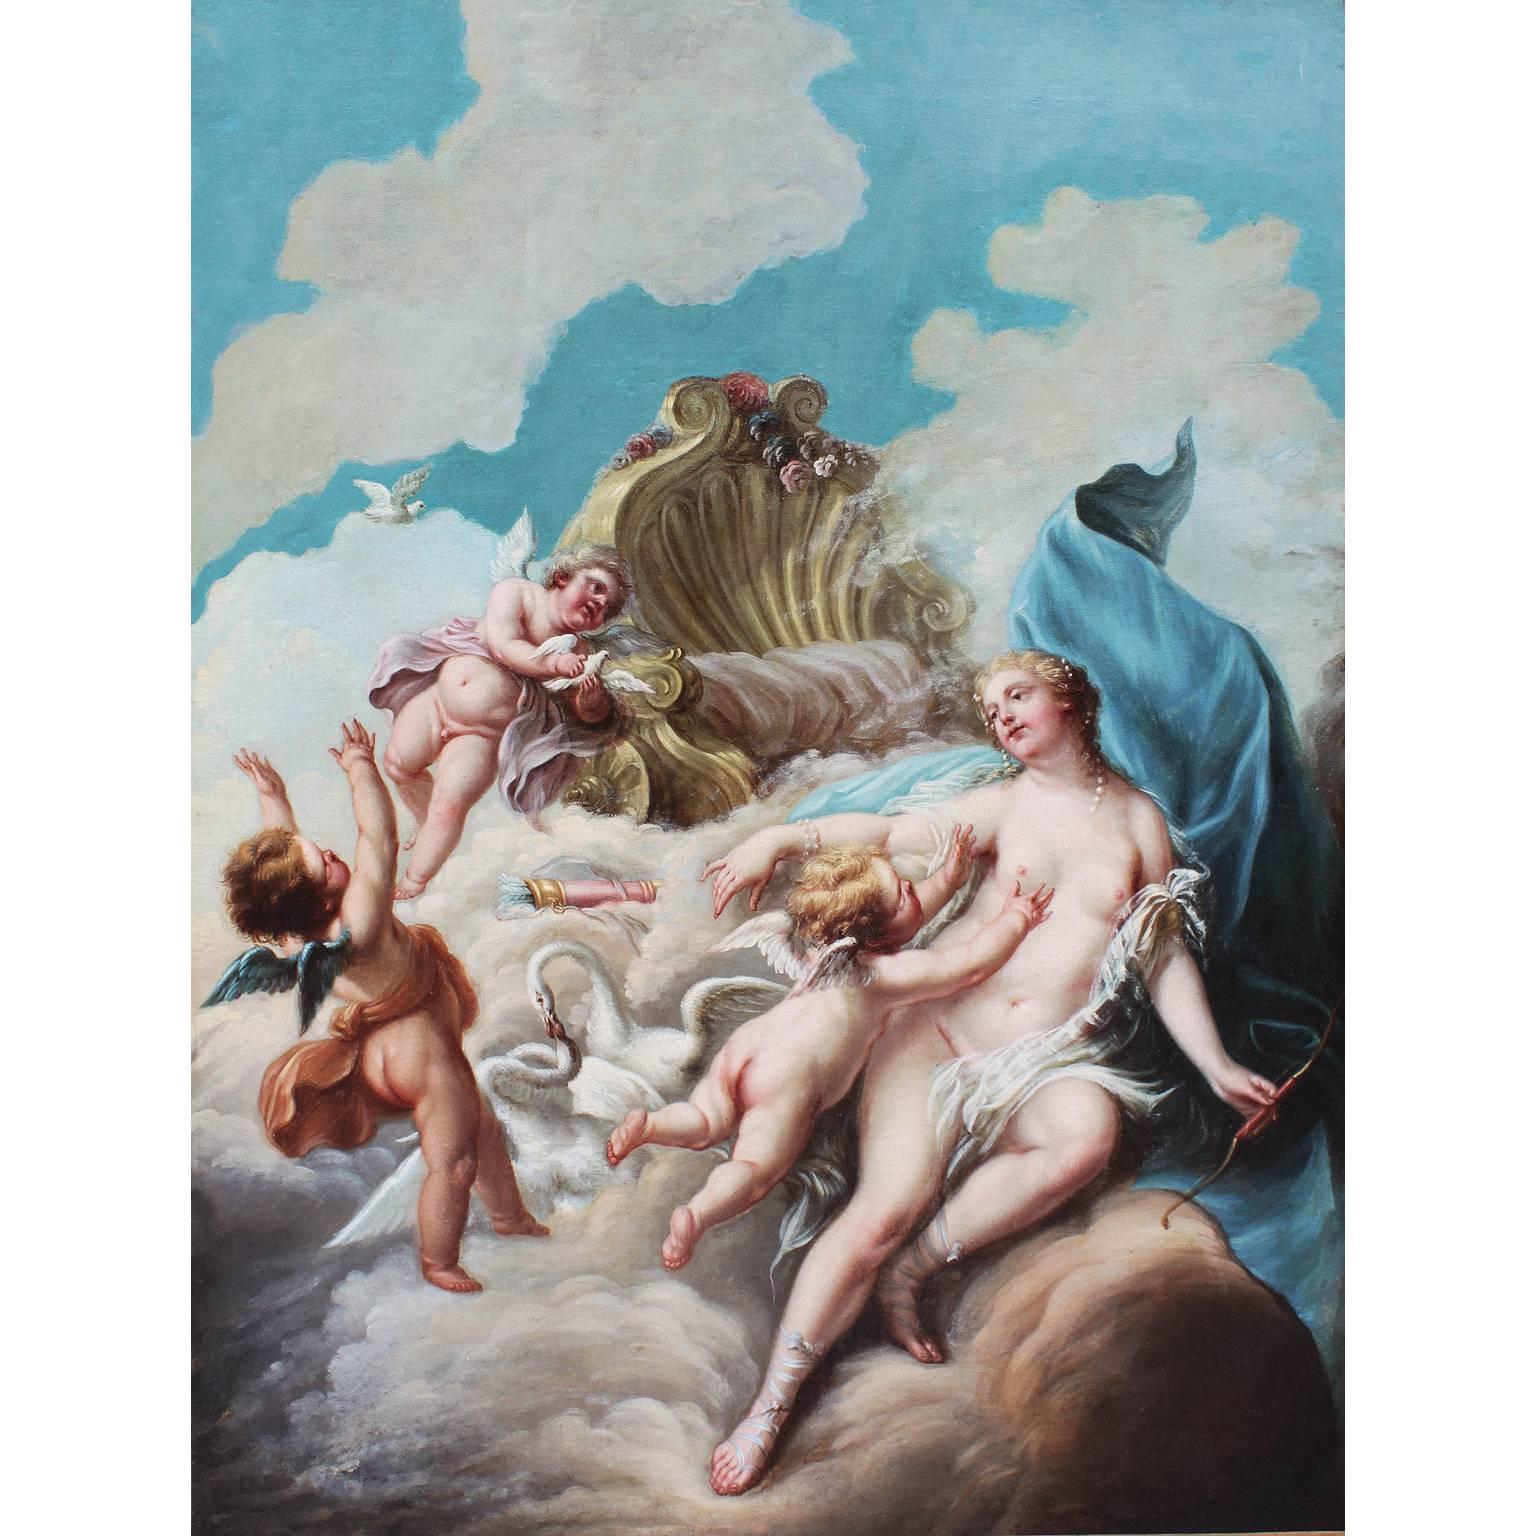 French 19th Century Oil on Canvas "the Triumph of Love" After François Boucher